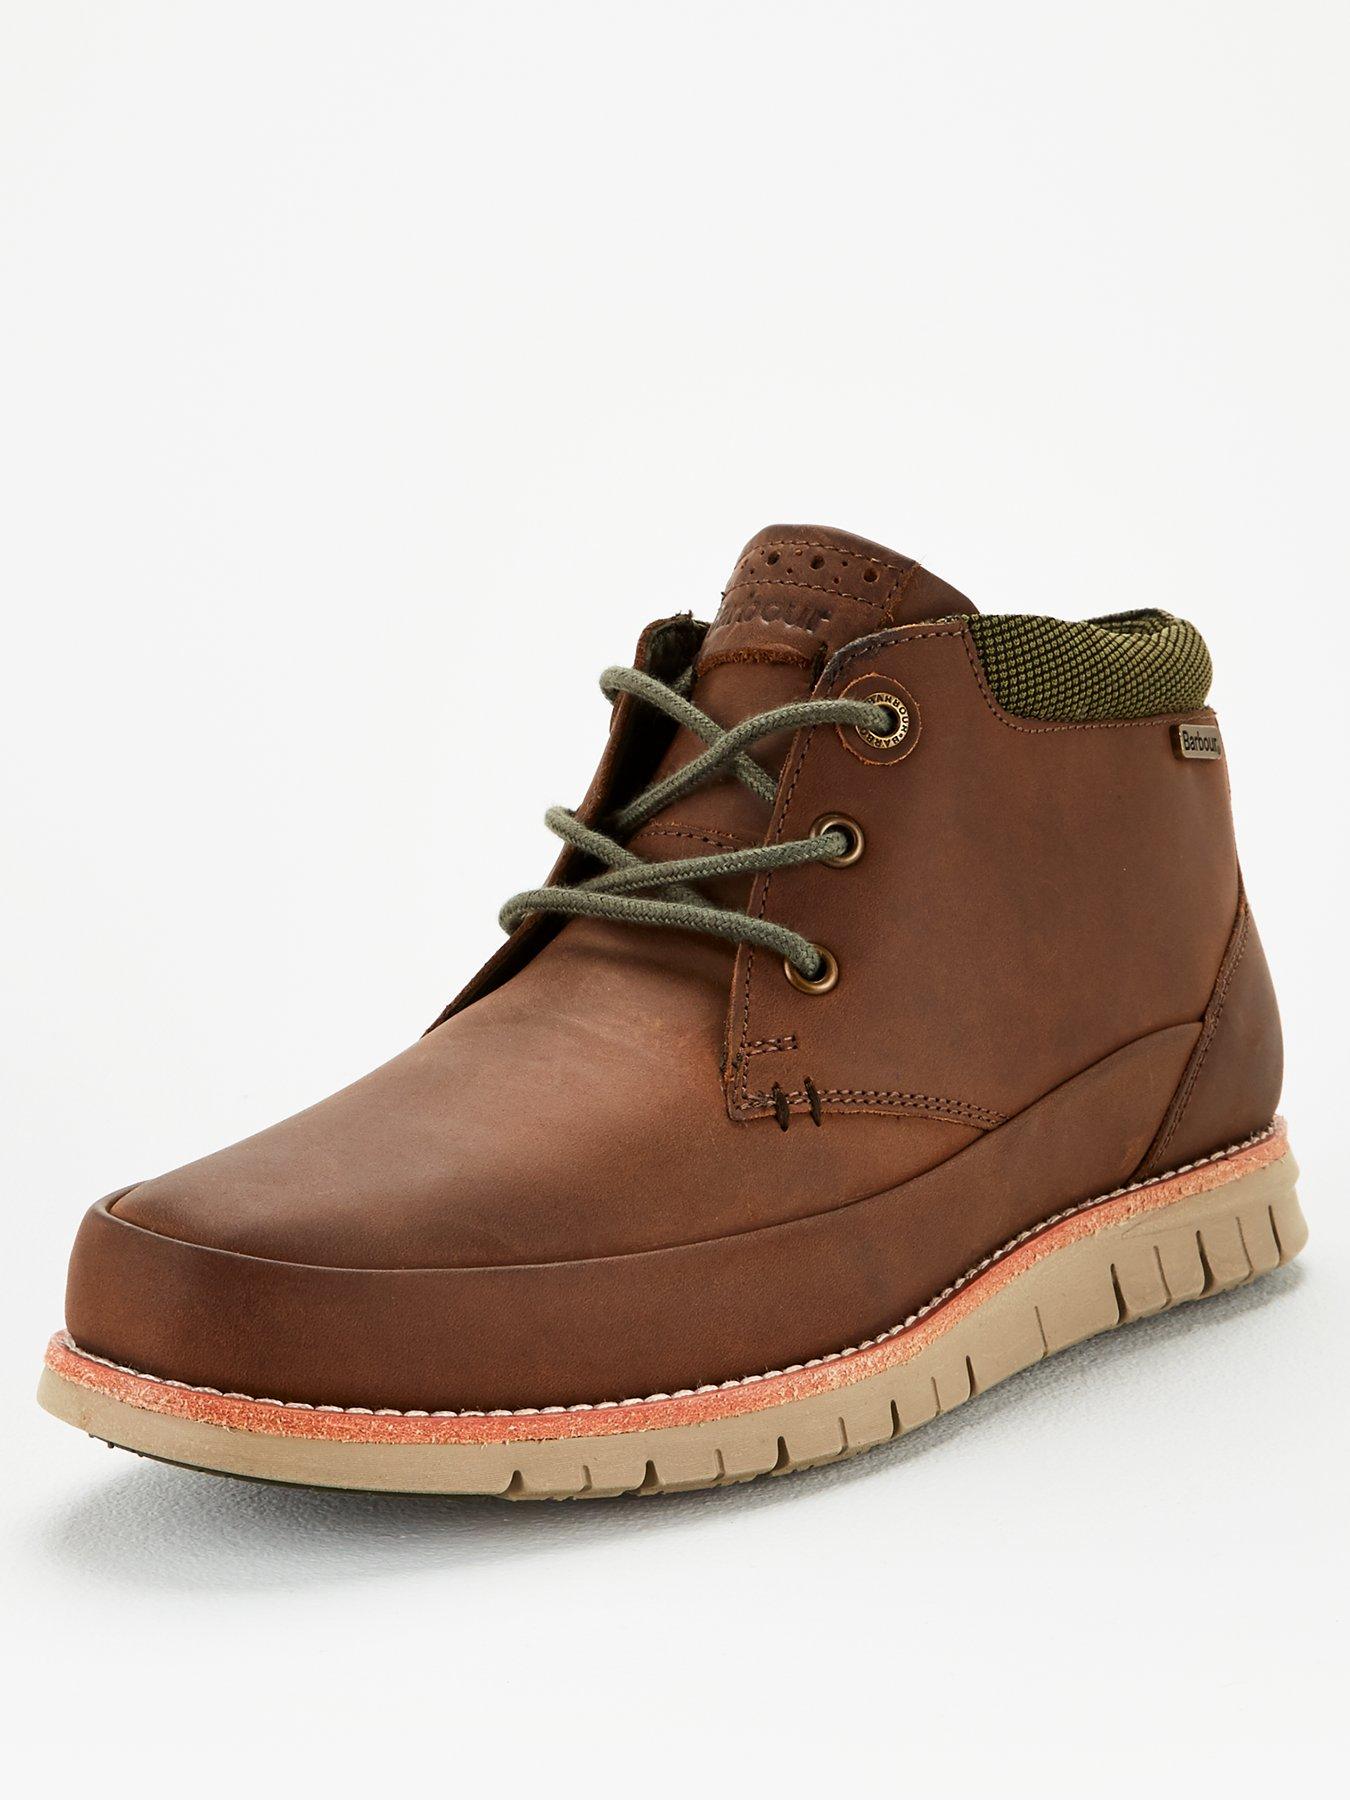 barbour nelson boots tan